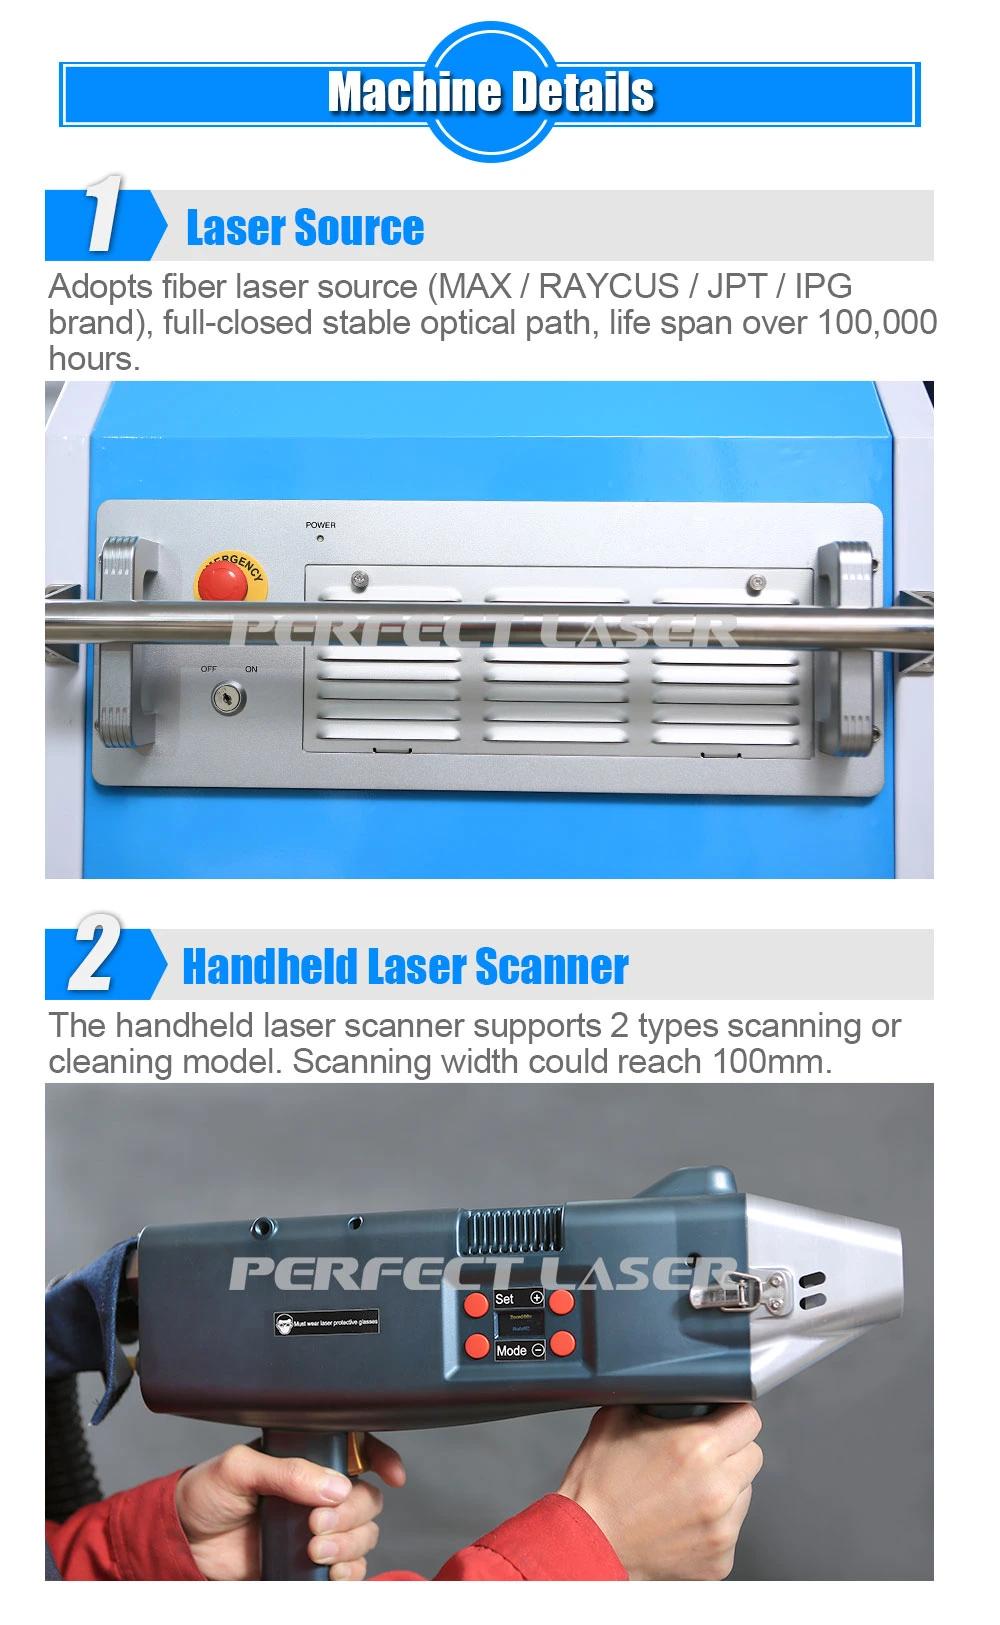 Portable 100W Fiber Laser Cleaning Rust Removal Machine